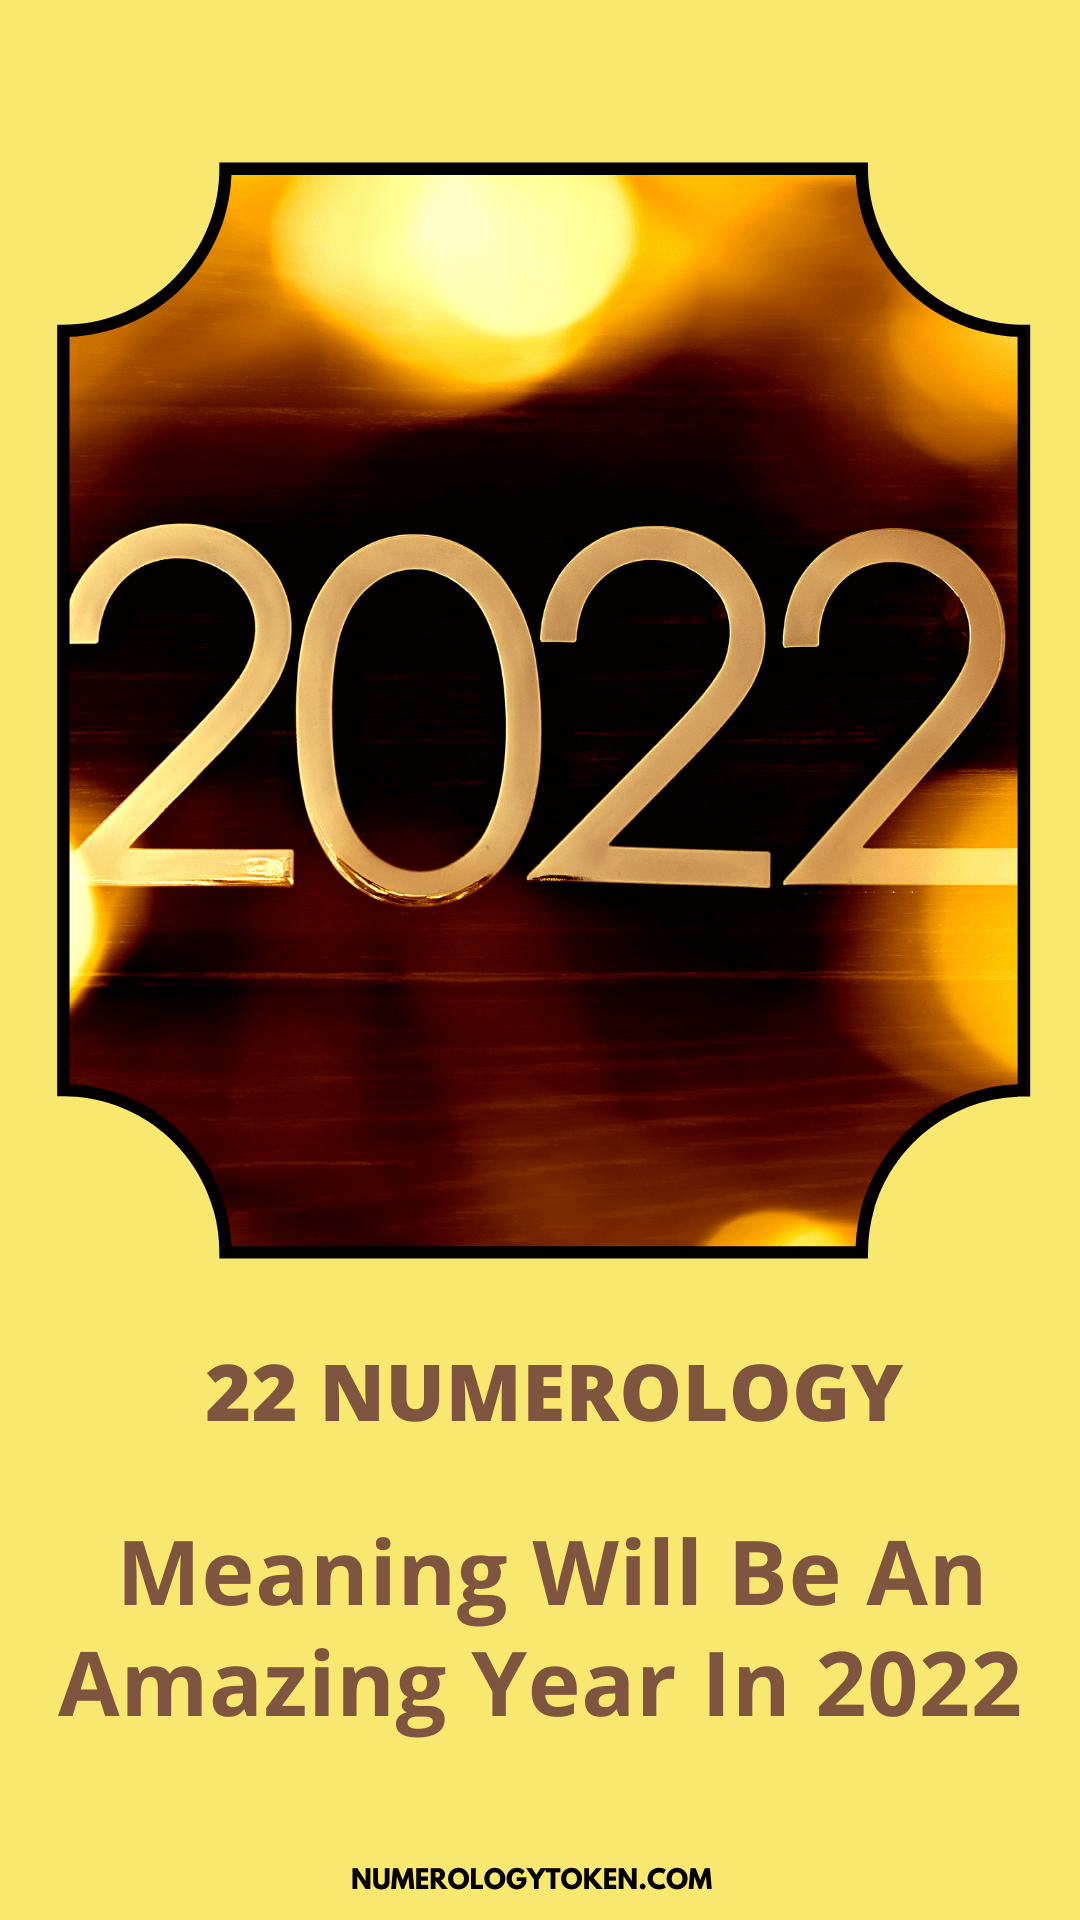 22 numerology meaning will be an amazing year in 2022